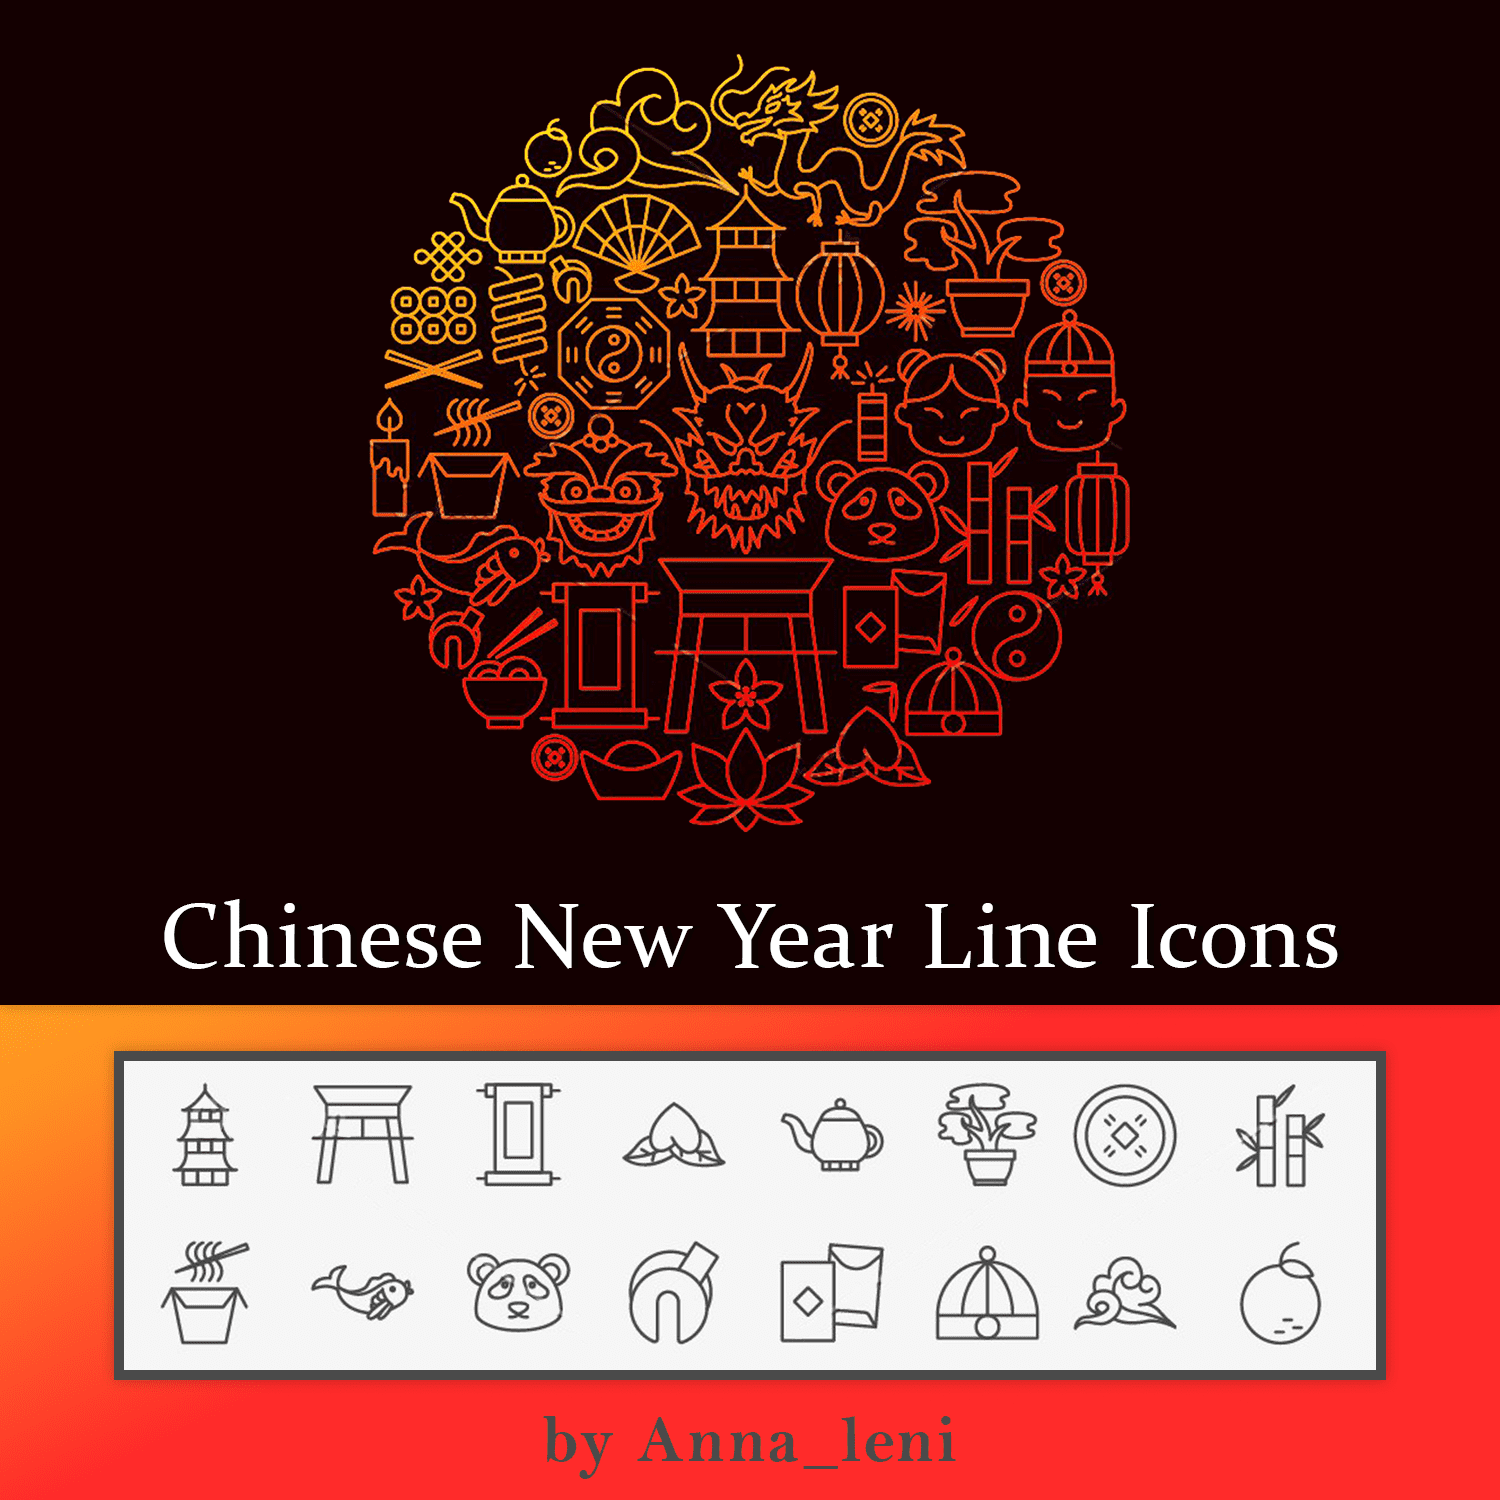 Chinese New Year Line Icons cover.